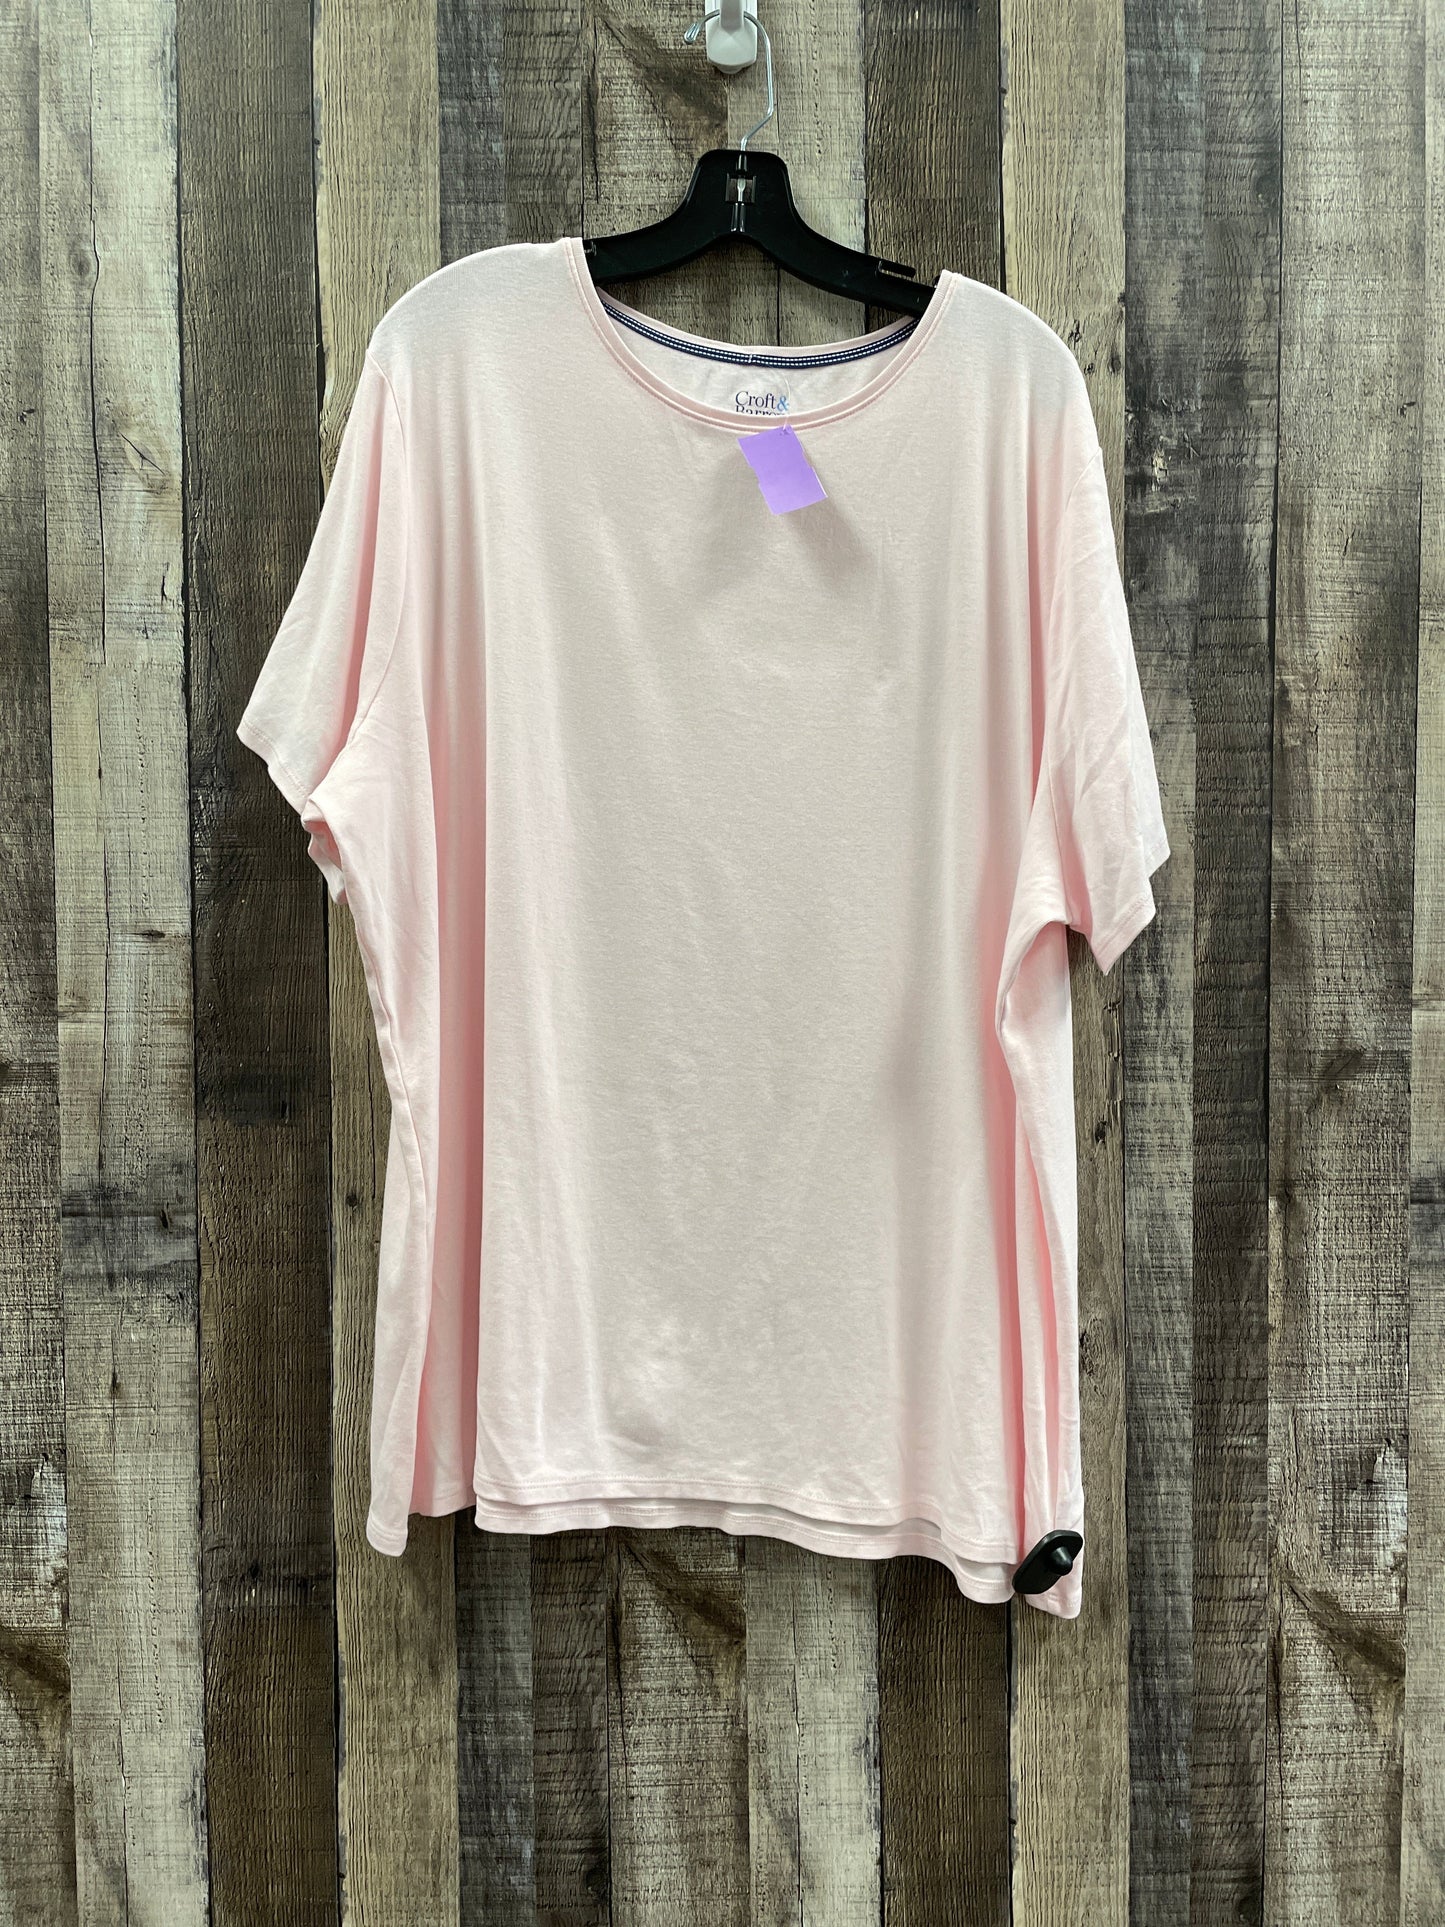 Pink Top Short Sleeve Croft And Barrow, Size 3x